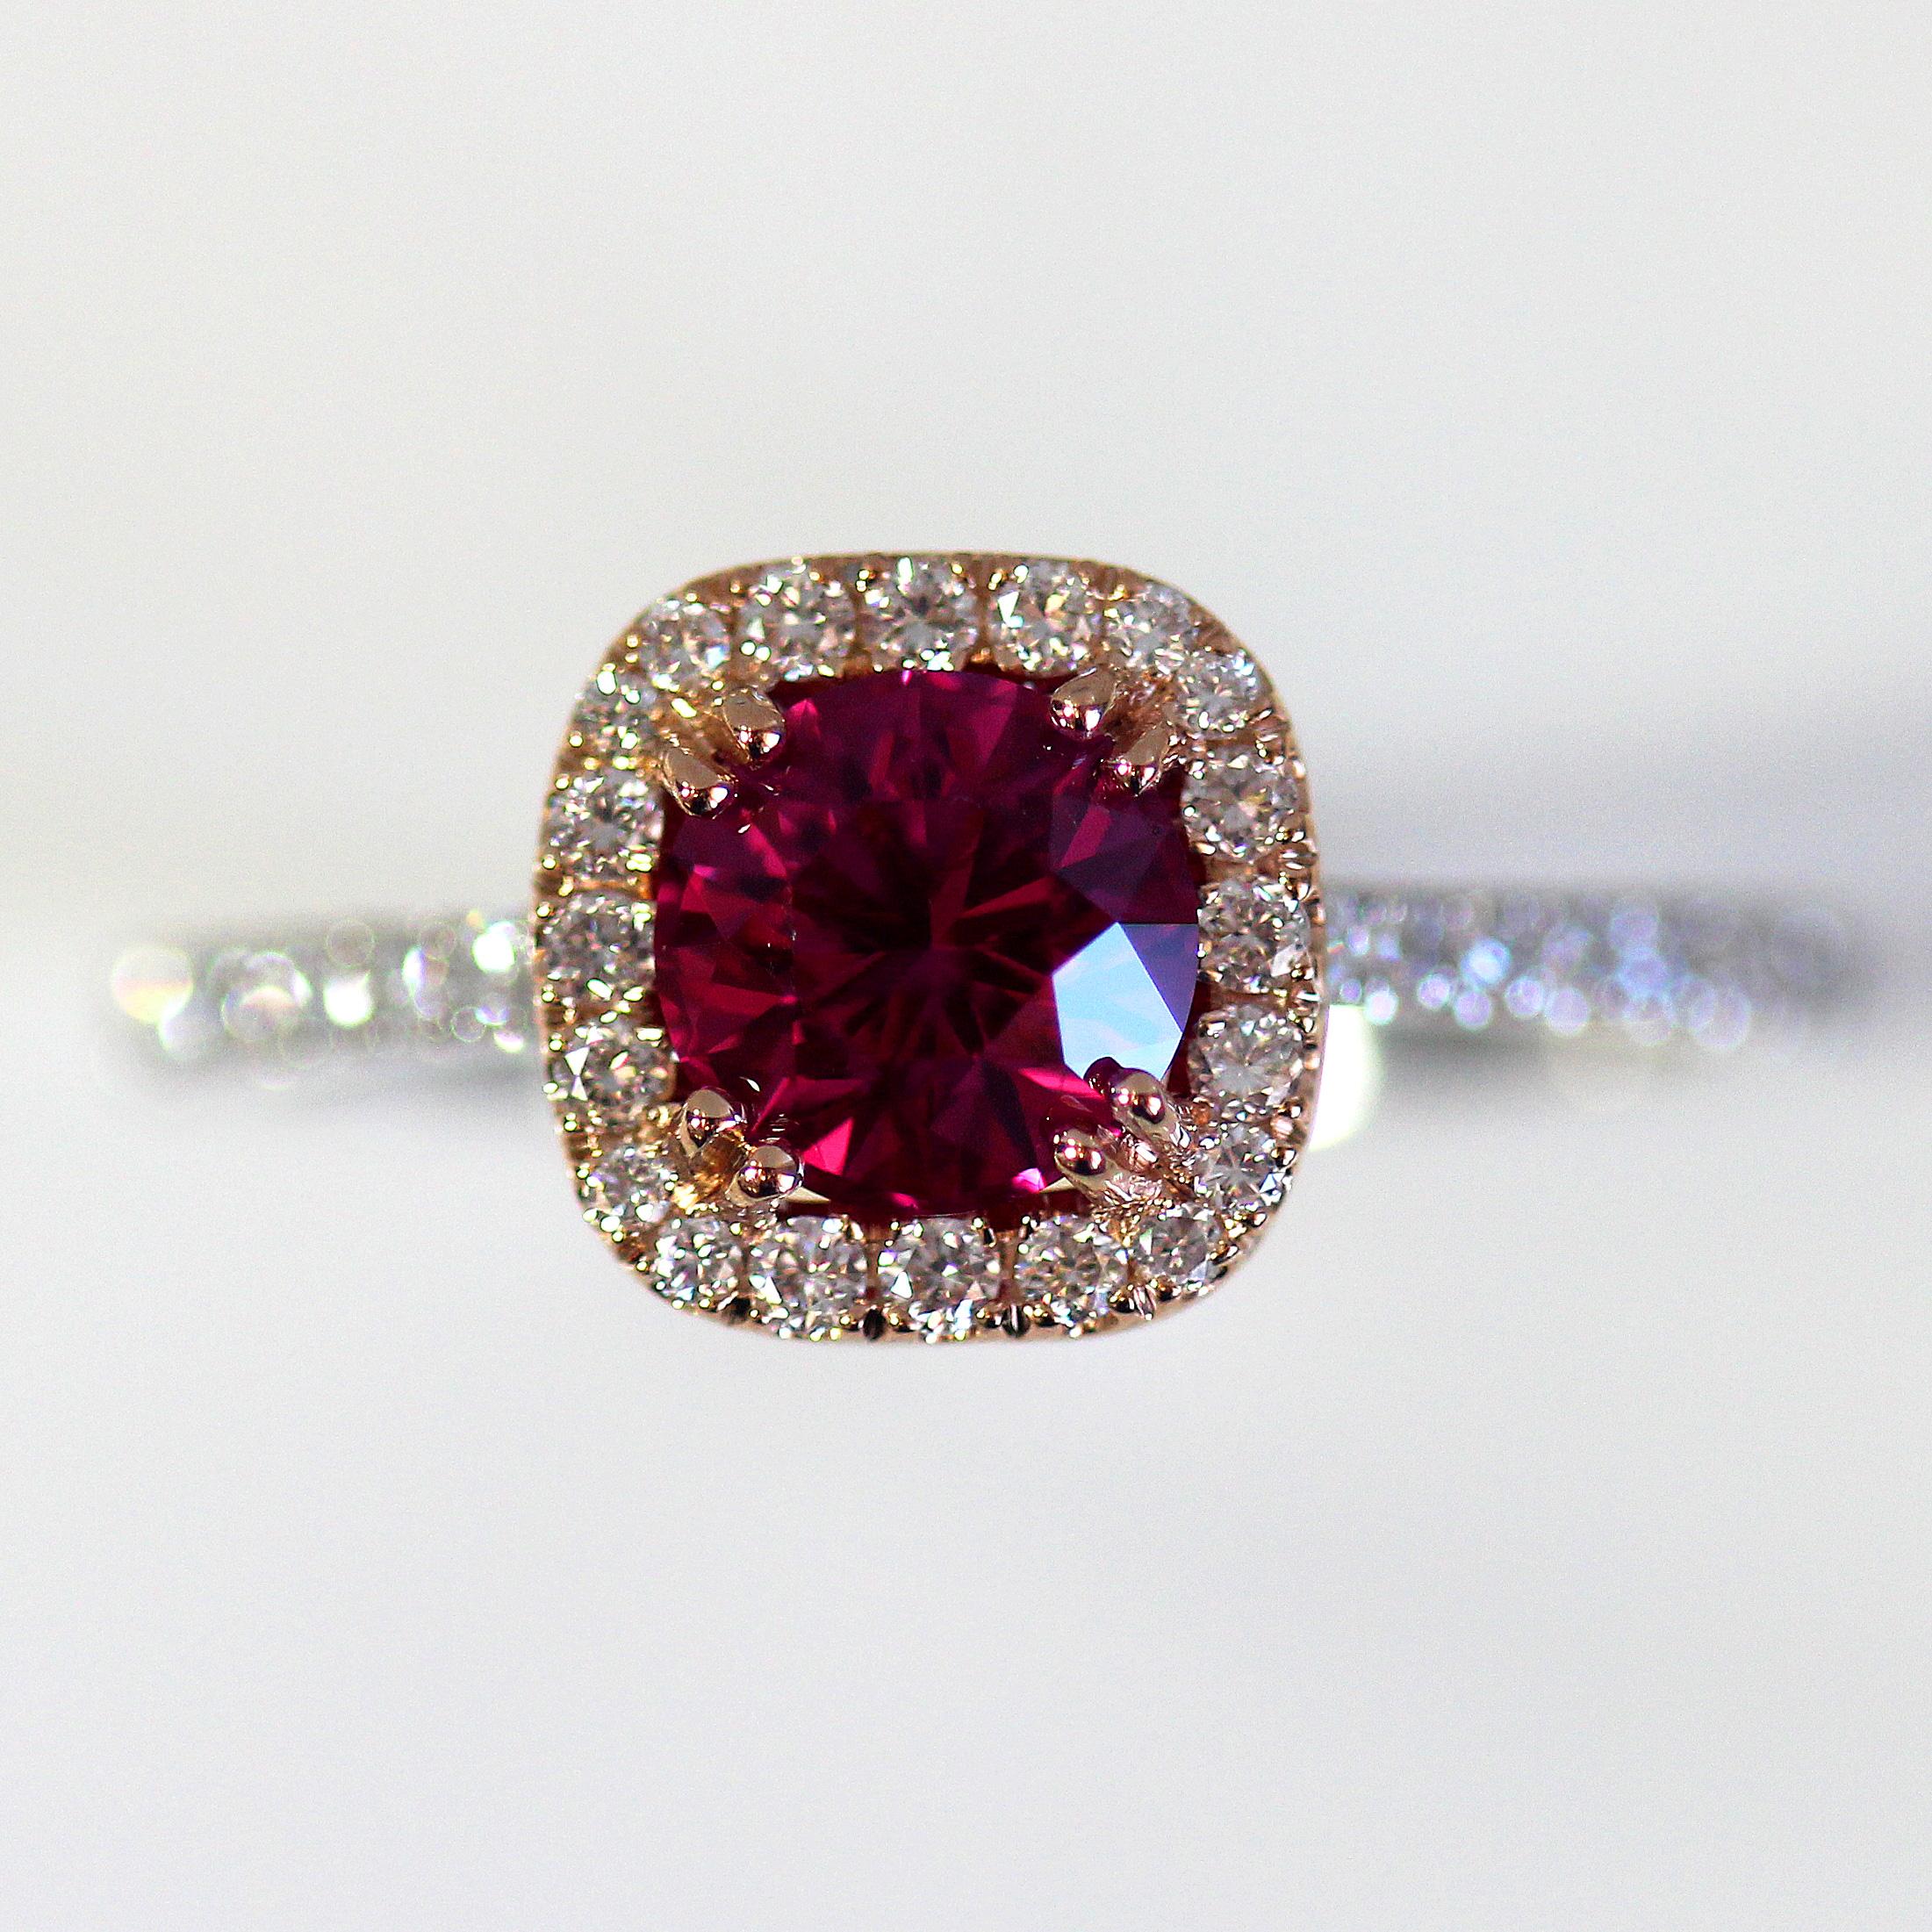 BV206001
Ring may have to be made to order depending on finger size , please allow 3 to 6 weeks but if you have a sooner delivery date needed let us know and we will see if we can accommodate you.

Stunning 1.20 Carat Round Vivid Red Ruby. Set in a